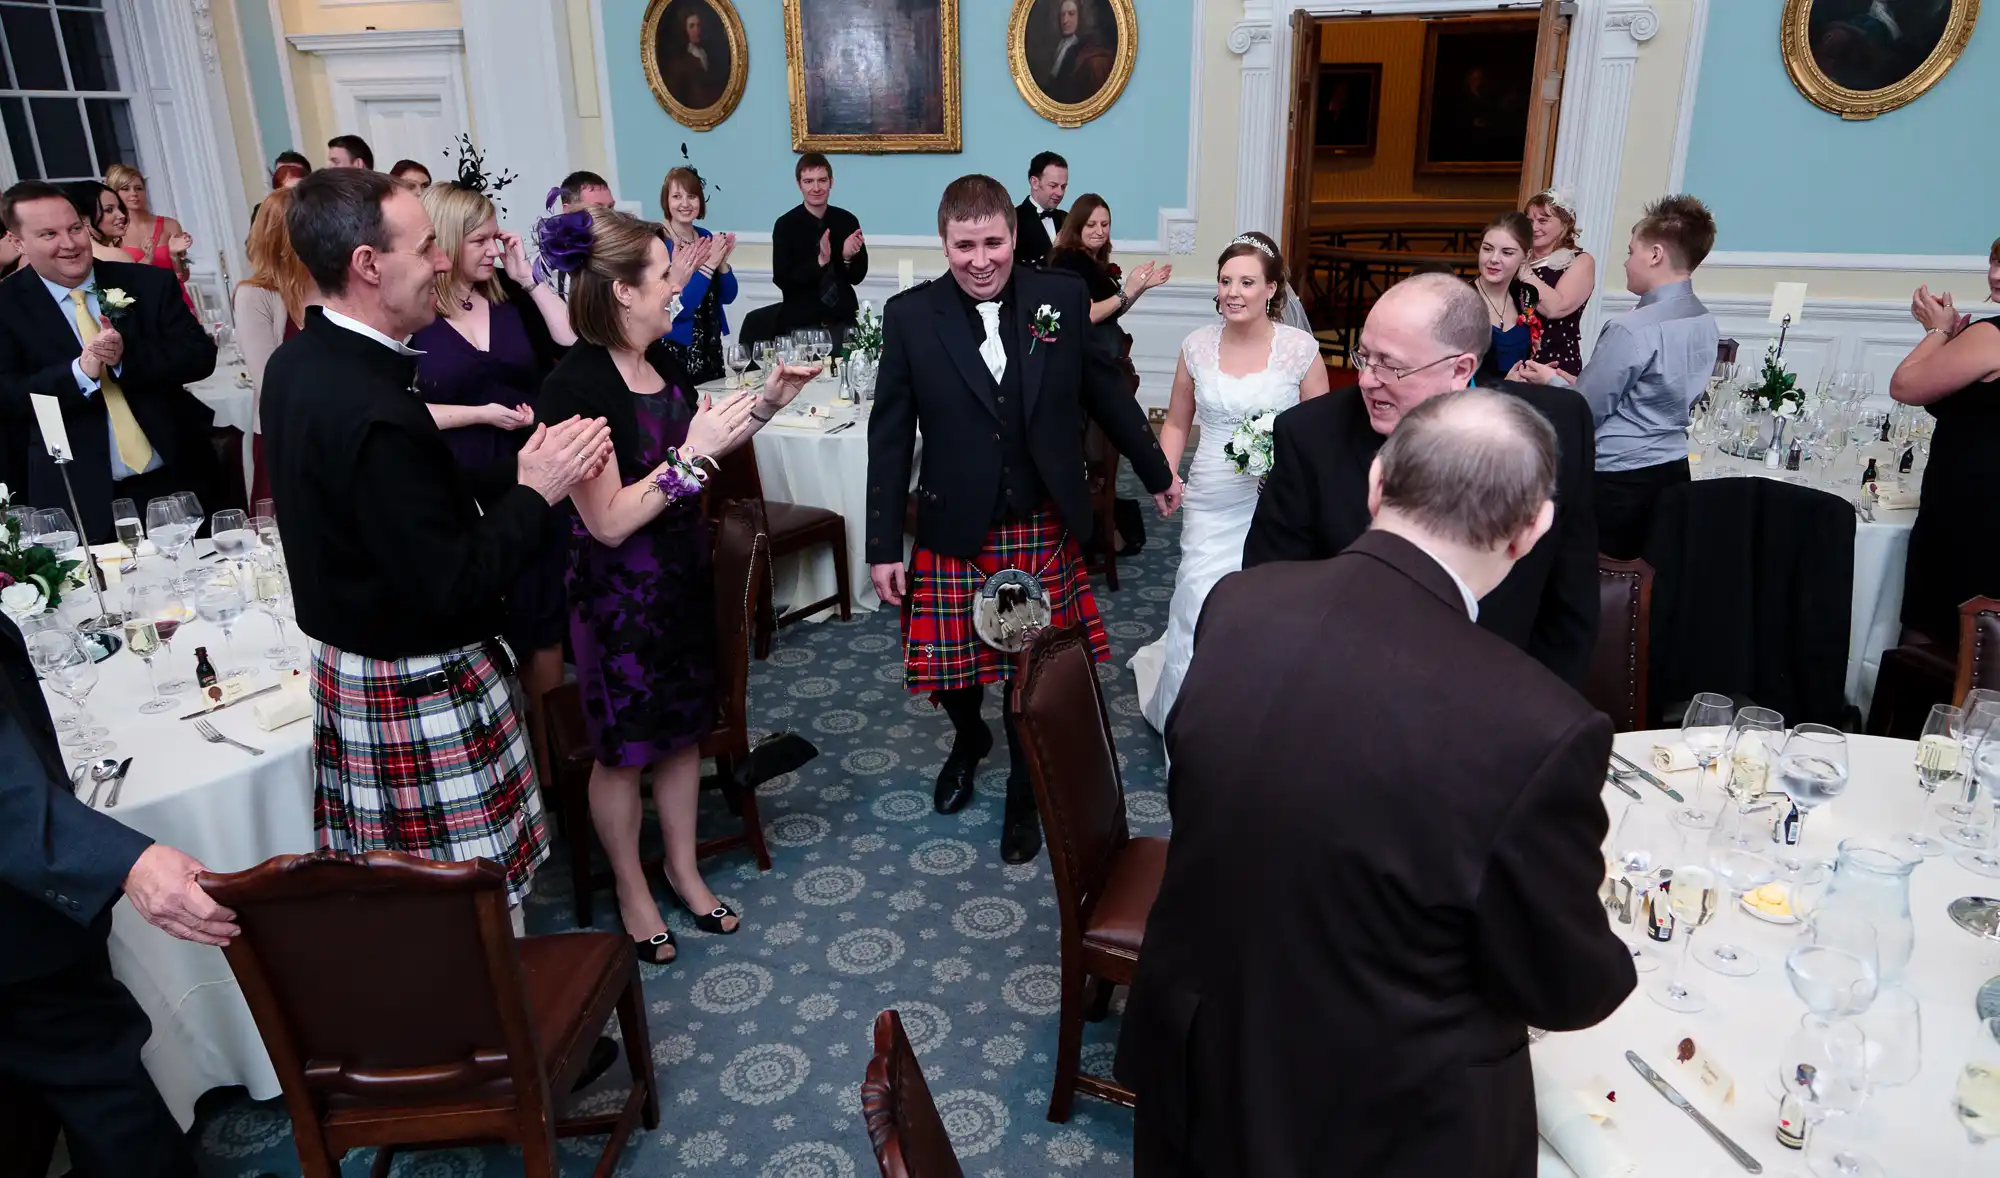 A bride and groom, the groom in a kilt, enter a banquet room to applause from guests seated at decorated tables.